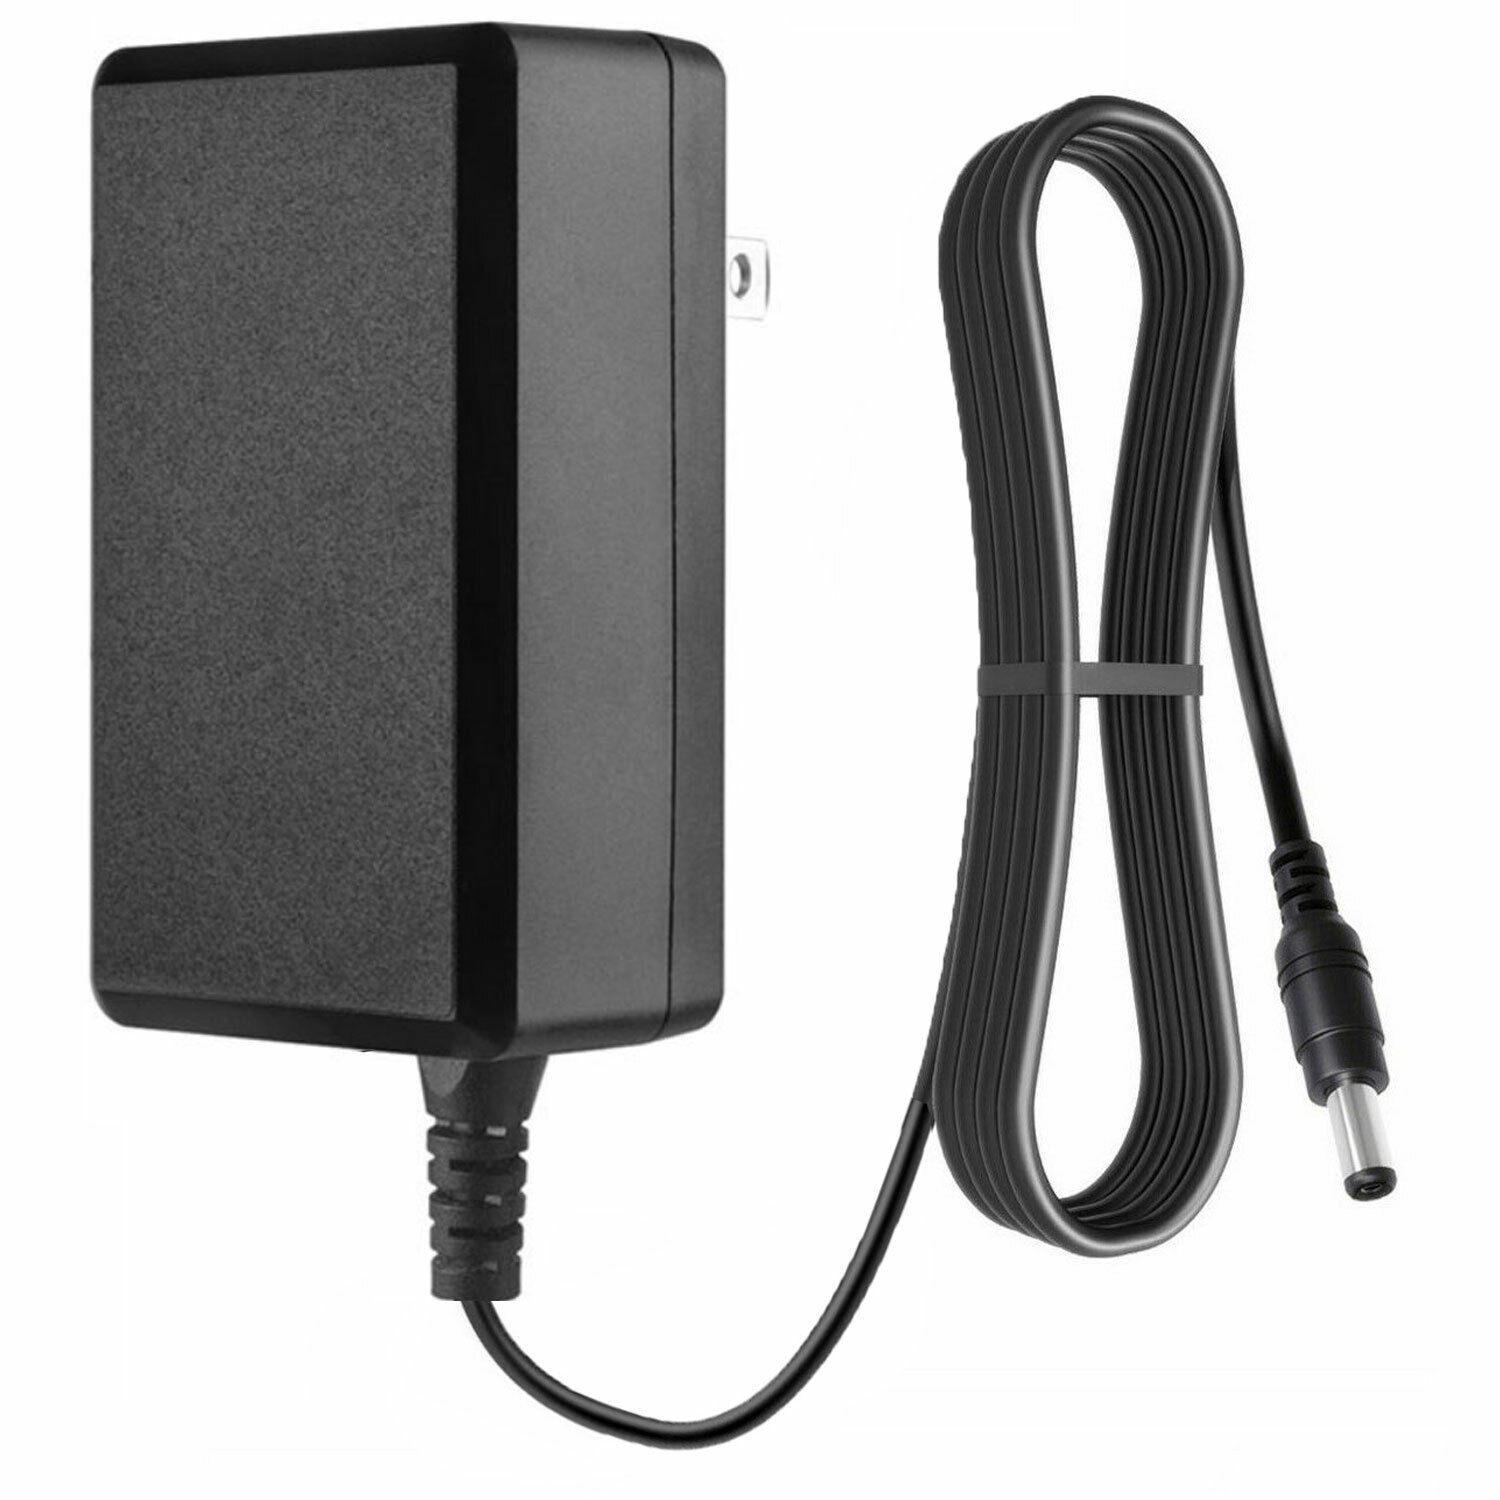 *Brand NEW* Bang & Olufsen B&O BeoPlay A2 15V 2A 30W AC-DC Adapter Power Supply Charger